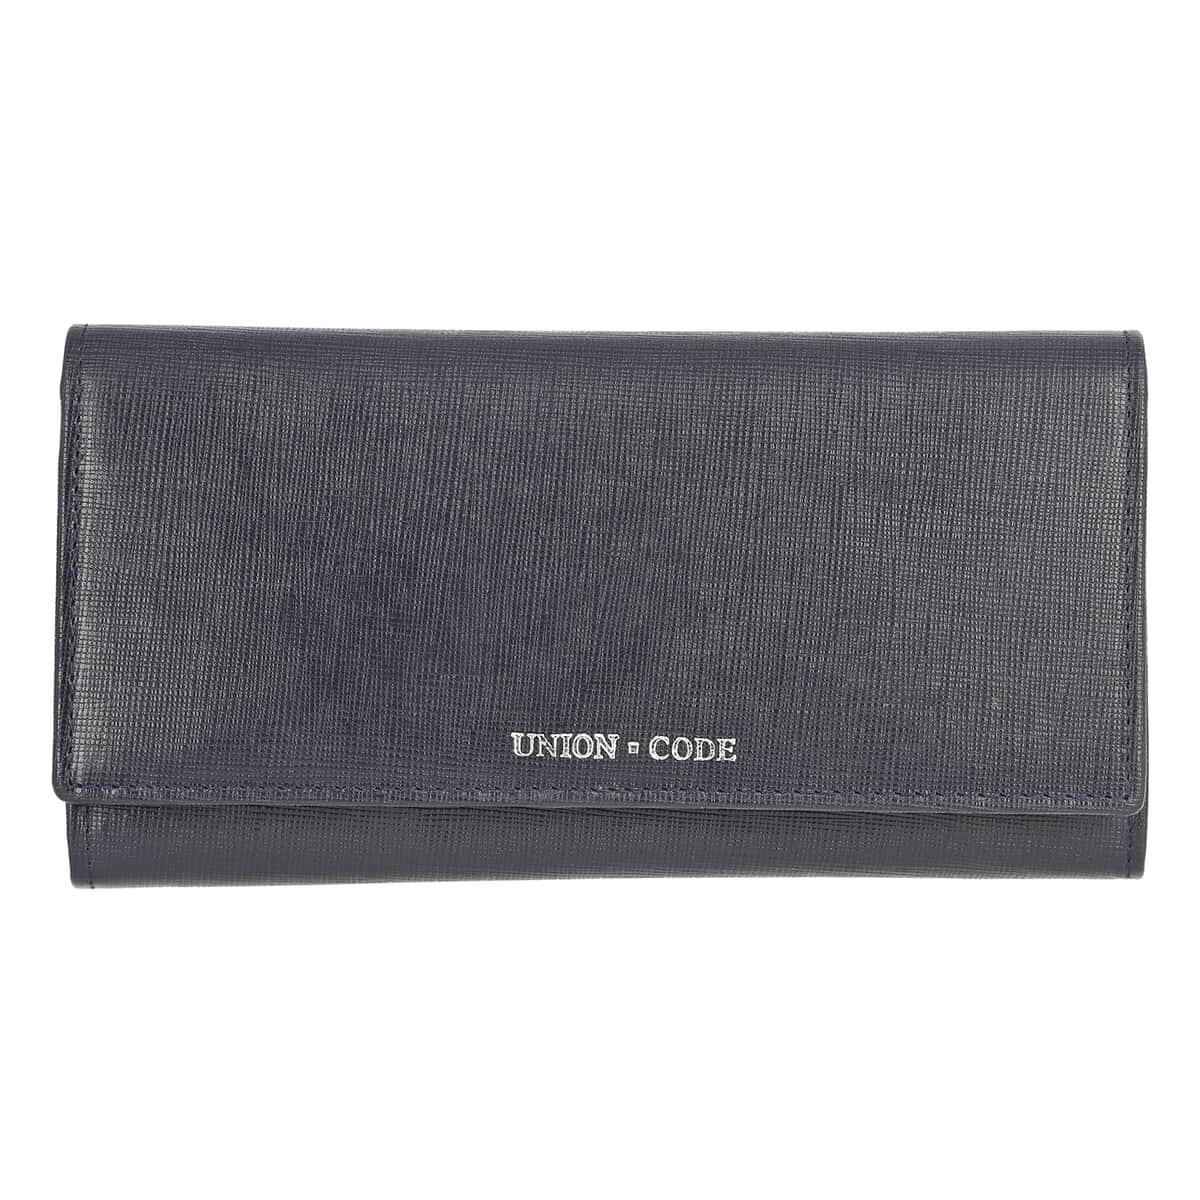 Union Code Navy Genuine Leather RFID Women's Wallet image number 0